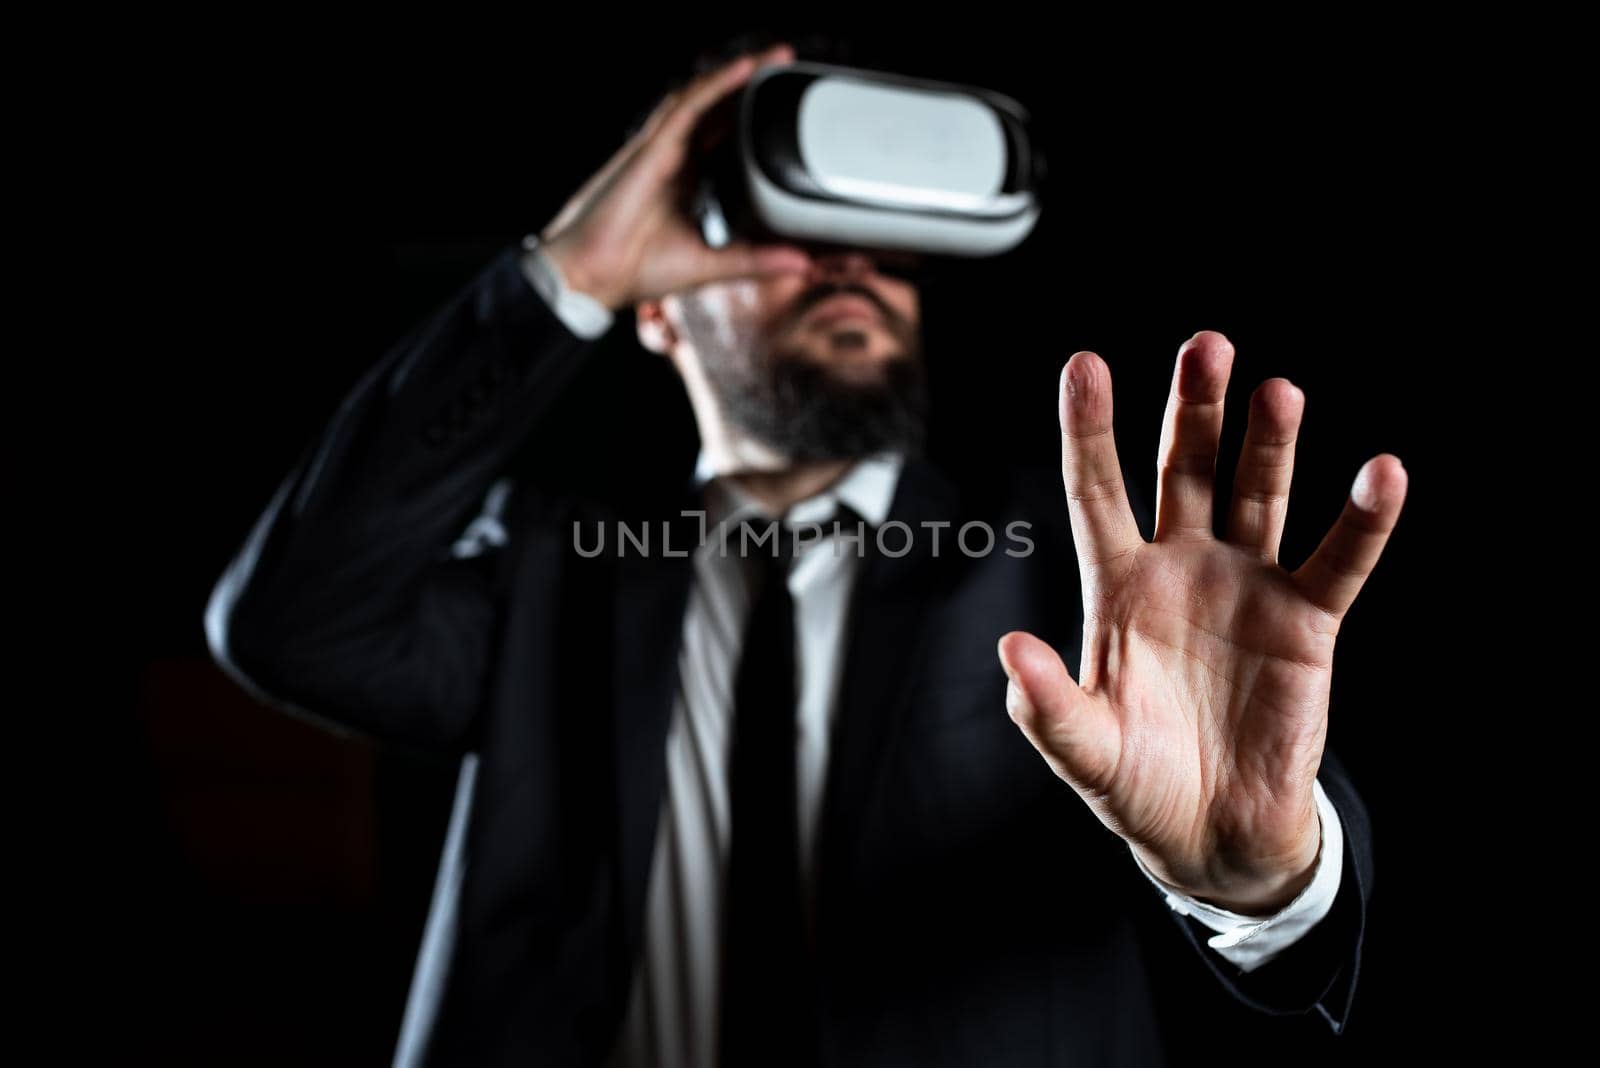 Male Professional Wearing Virtual Reality Goggles Gesturing And Introducing Modern Technology Of Learning. Businessman Wearing Suit Taking Training Through Simulator. by nialowwa